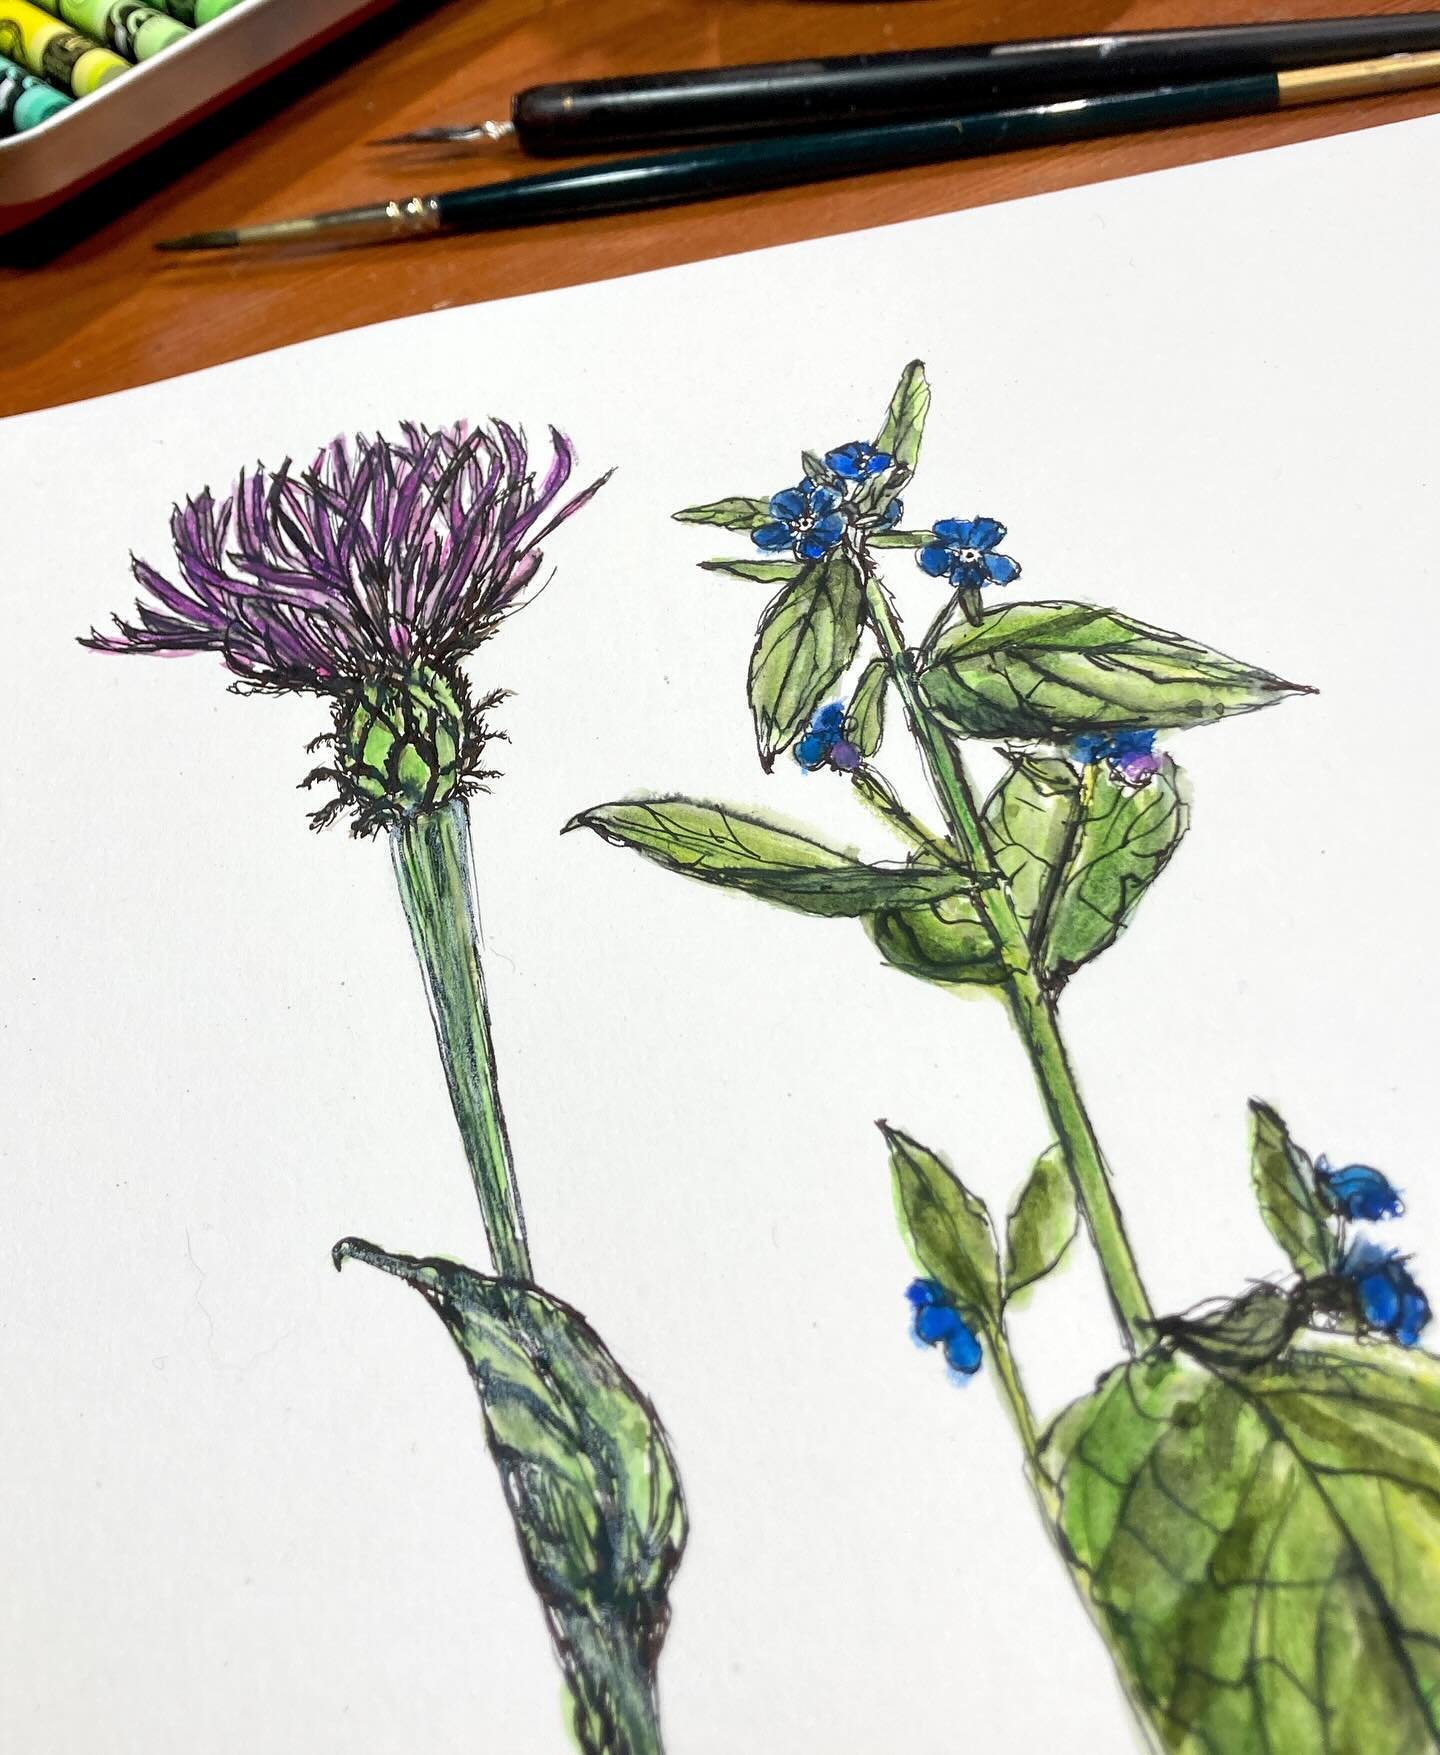 Centaurea montana and Green Alkanet. Some bold, bright spring colours in the garden at the moment. I thought I would try and capture the &lsquo;zingyness&rsquo;. 😊

#suenichollsdesigns #centaureamontana #pentaglottissempervirens #penink #greenalkane